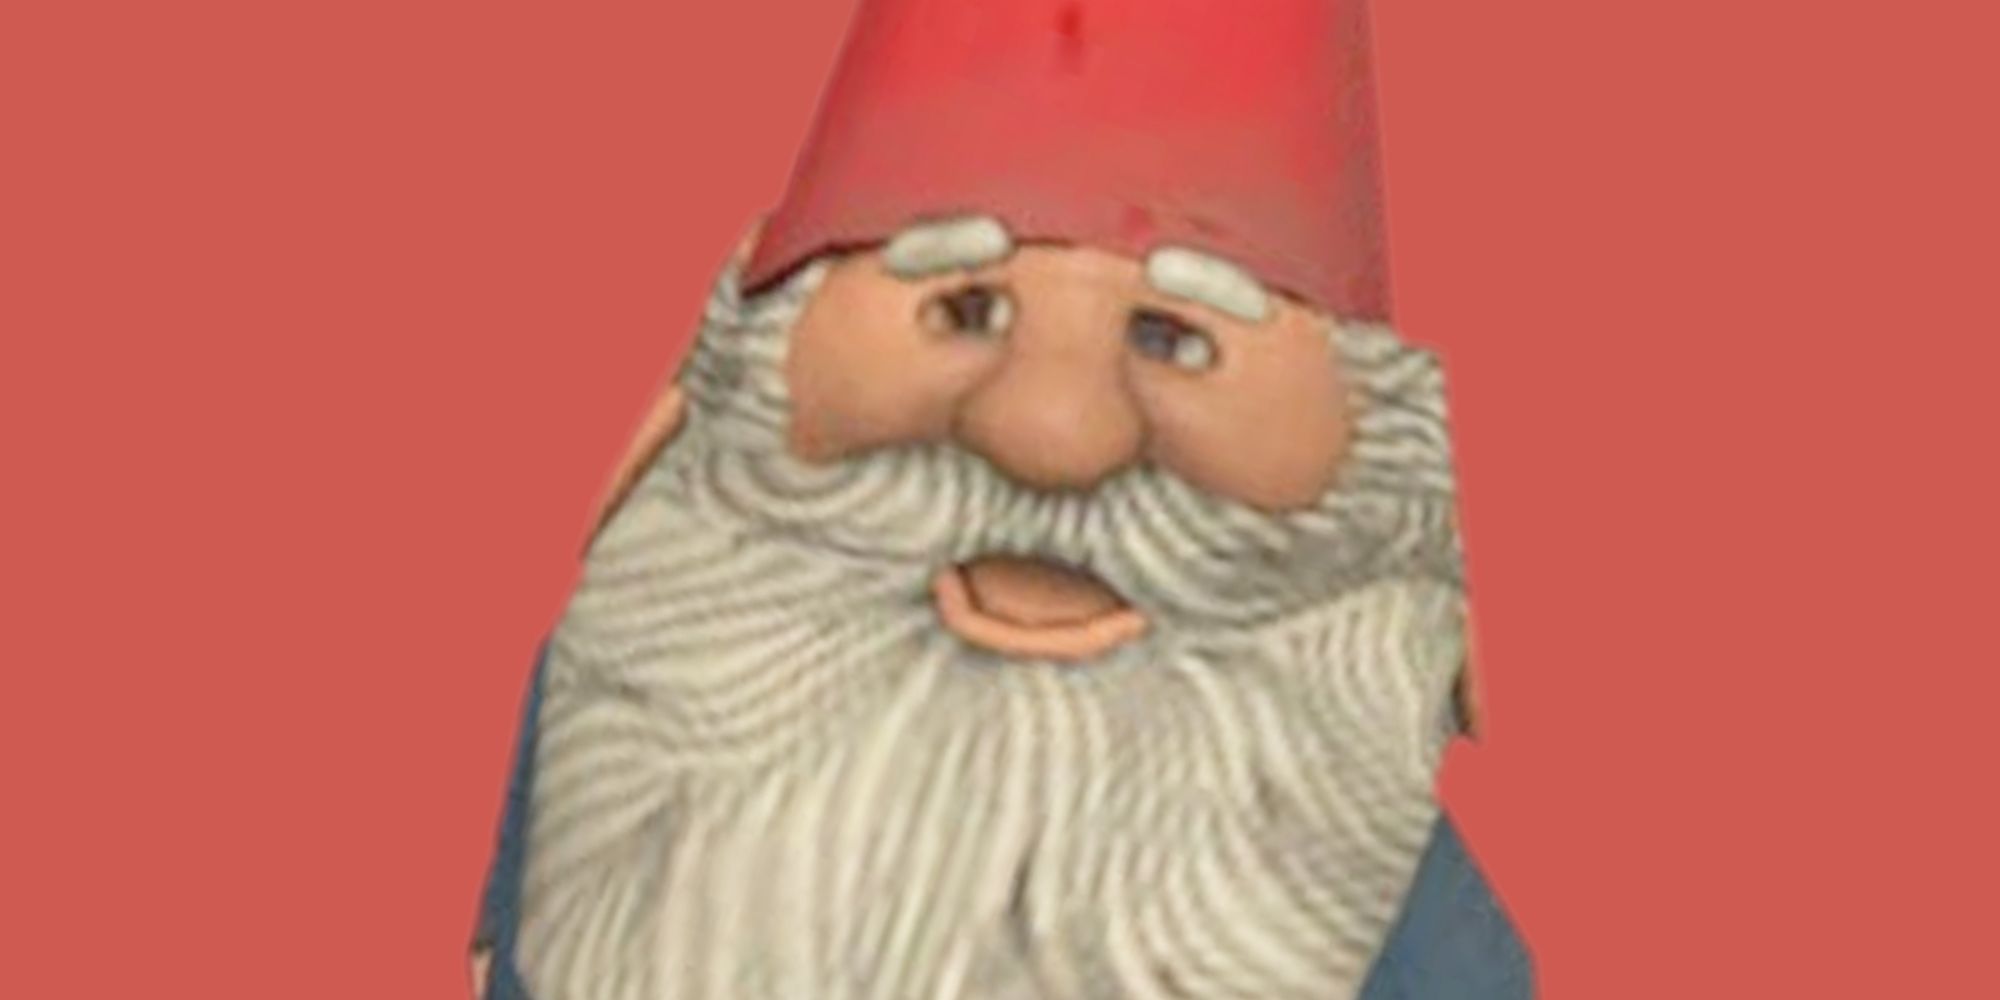 Half-Life 2 garden gnome over a pastel red background